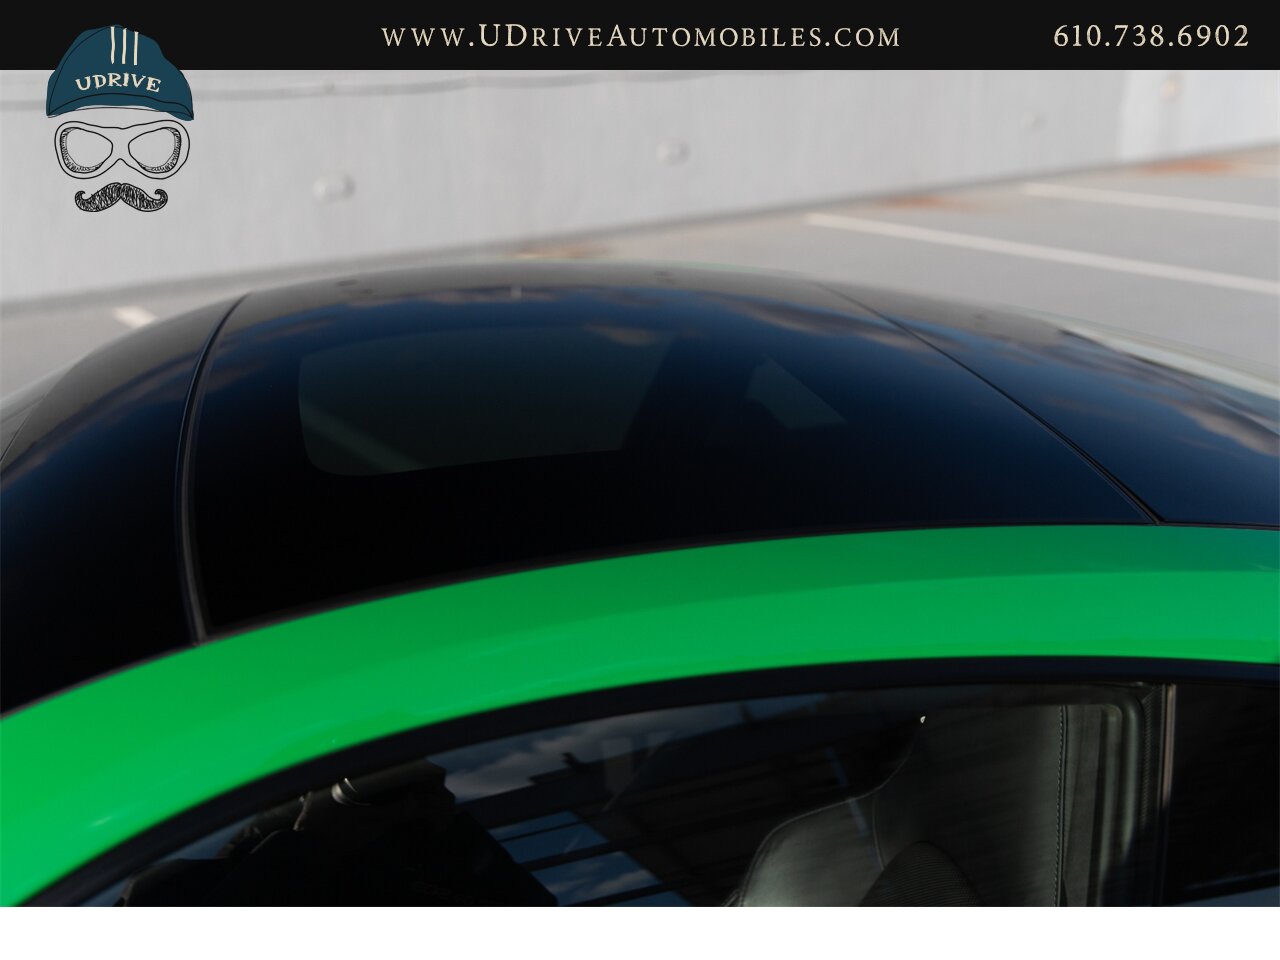 2016 Porsche 911 Turbo S PTS Viper Green Aerokit $203k MSRP  Painted Side Skirts Painted Grilles Wheels in Black - Photo 44 - West Chester, PA 19382